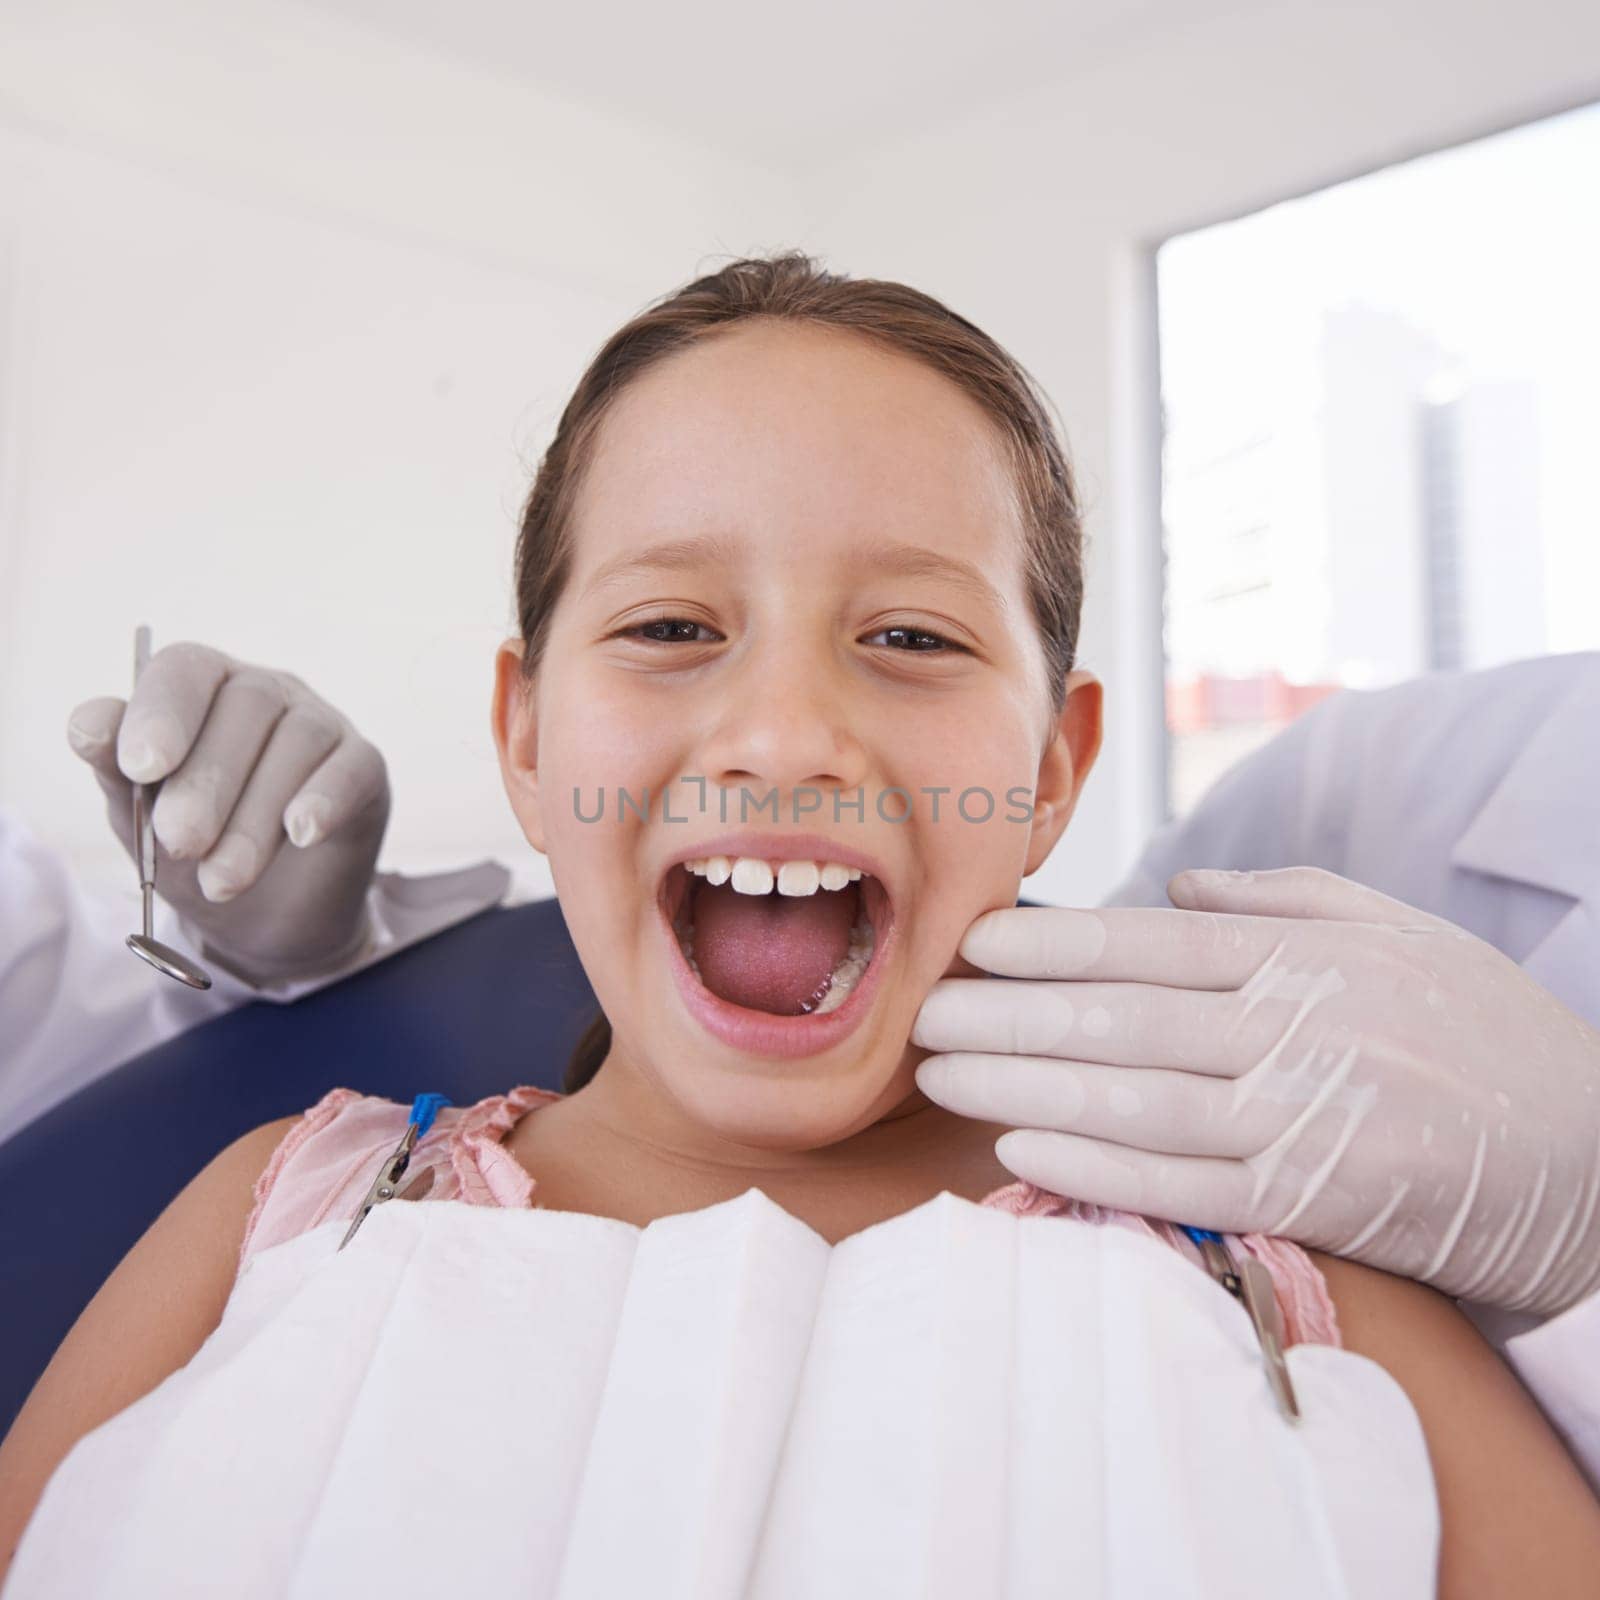 Child, mouth and portrait for dentist consultation for teeth examination for healthy oral care, whitening or cleaning. Female person, girl and face with hands for hygiene checkup, wellness or gums by YuriArcurs